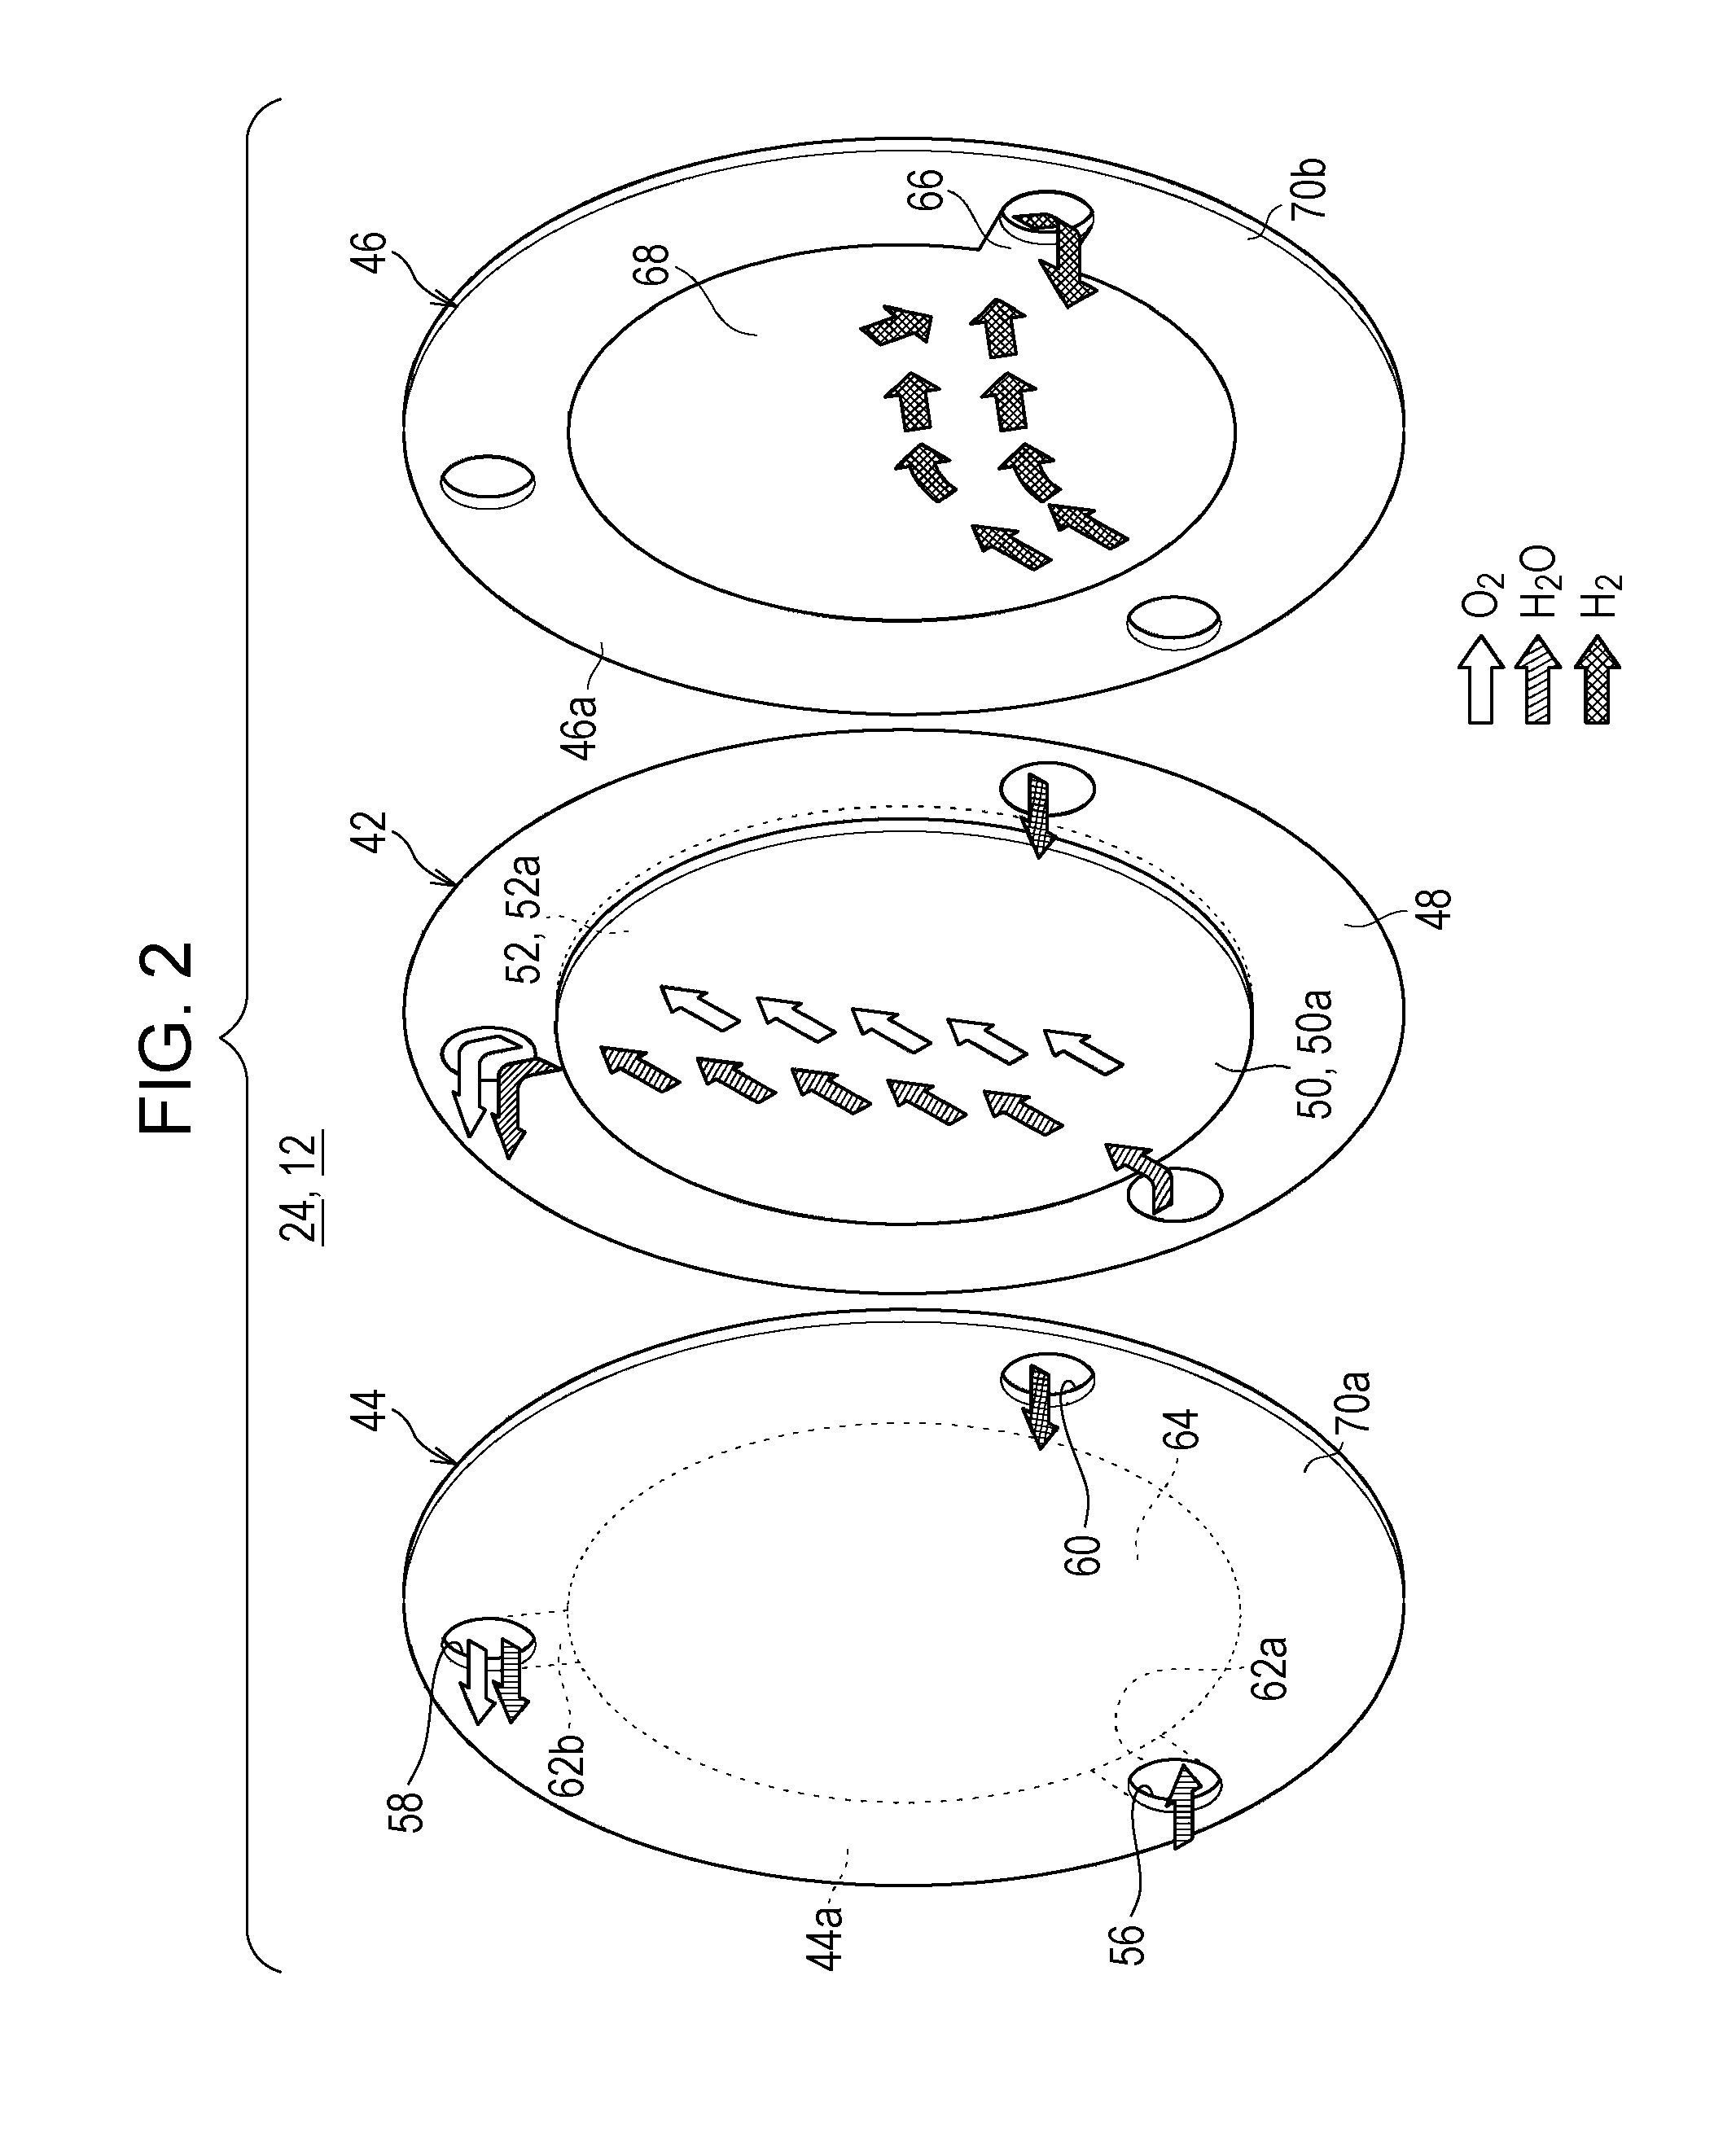 Method for operating water electrolysis system